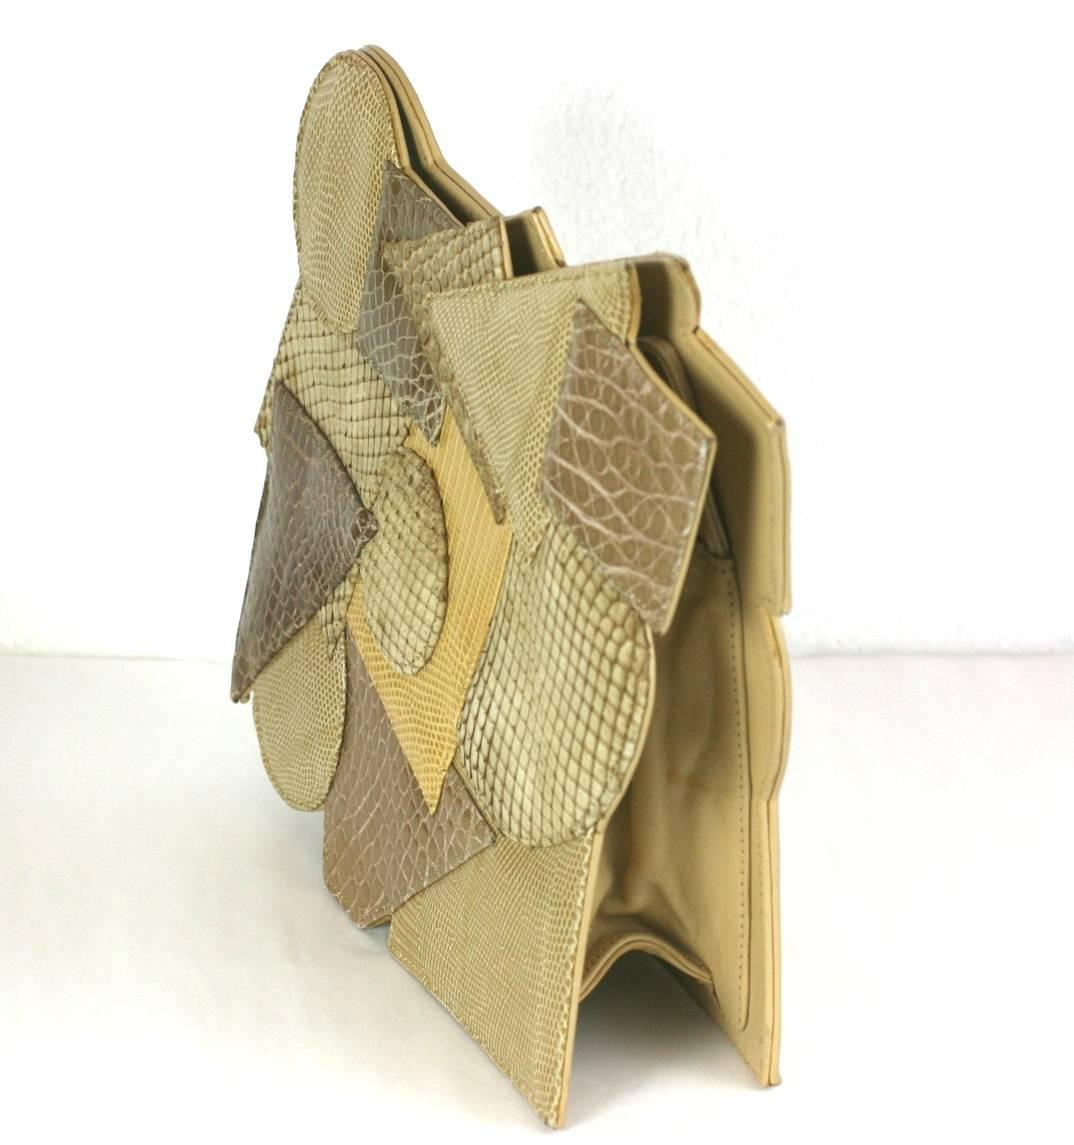 Carlos Falchi Pieced Snake and Calf Bag in an applied Cubist design. Varying alligator and snakeskin forms are patched onto the front. The form of the bag is then created by this design. 
A shoulder strap can be folded into the clutch. Striking and